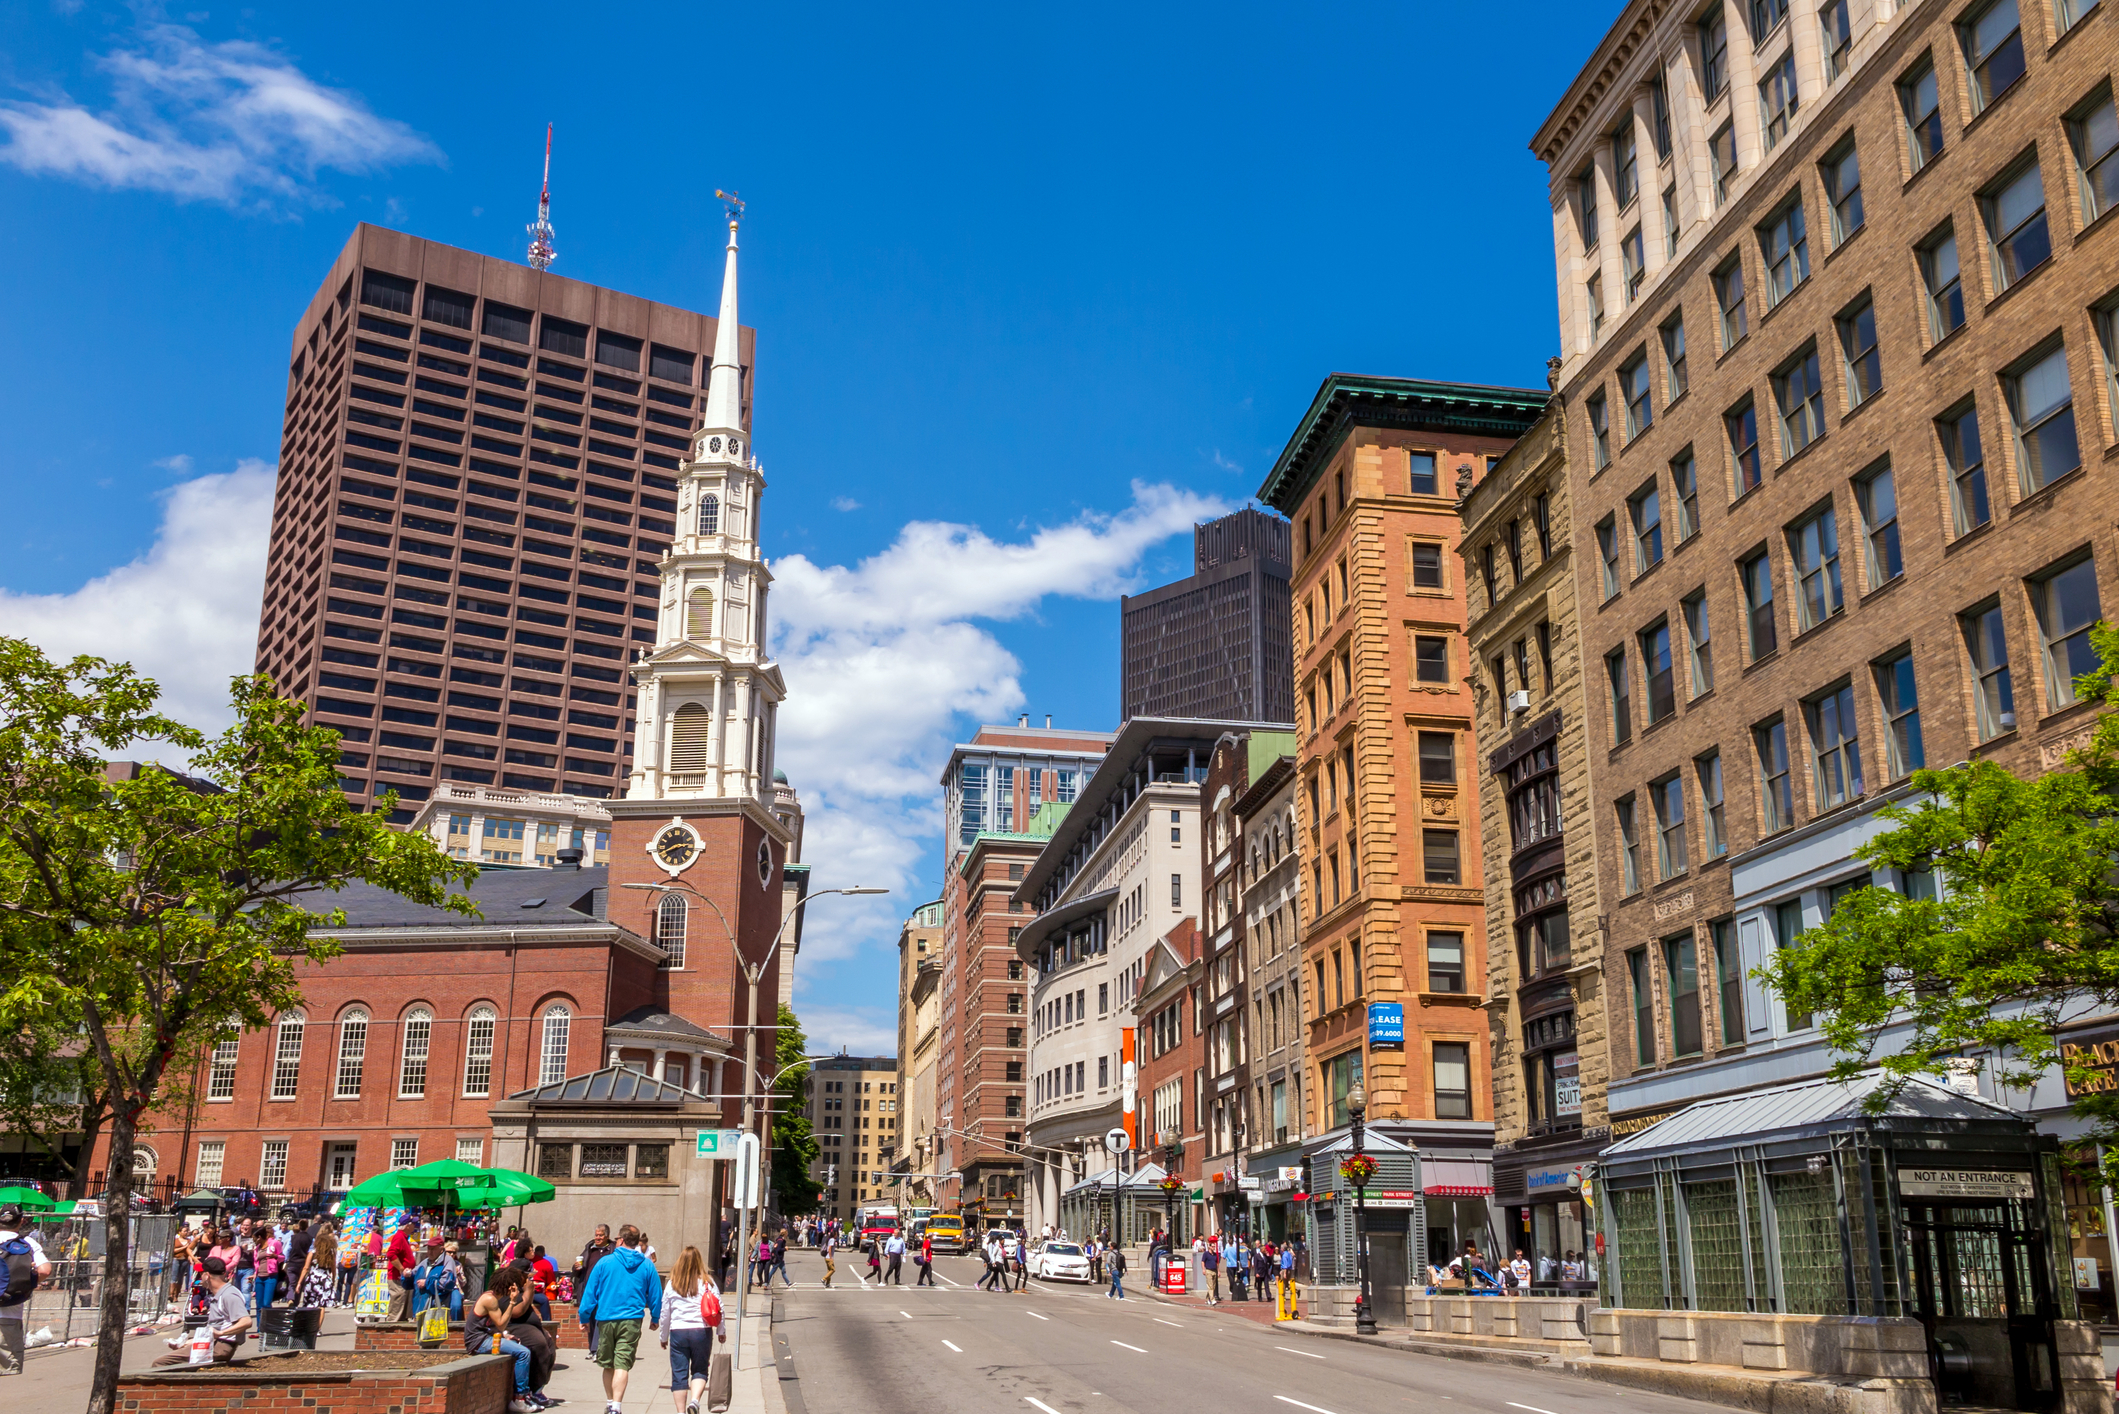 A view of Boston's Freedom Trail with historic buildings and church